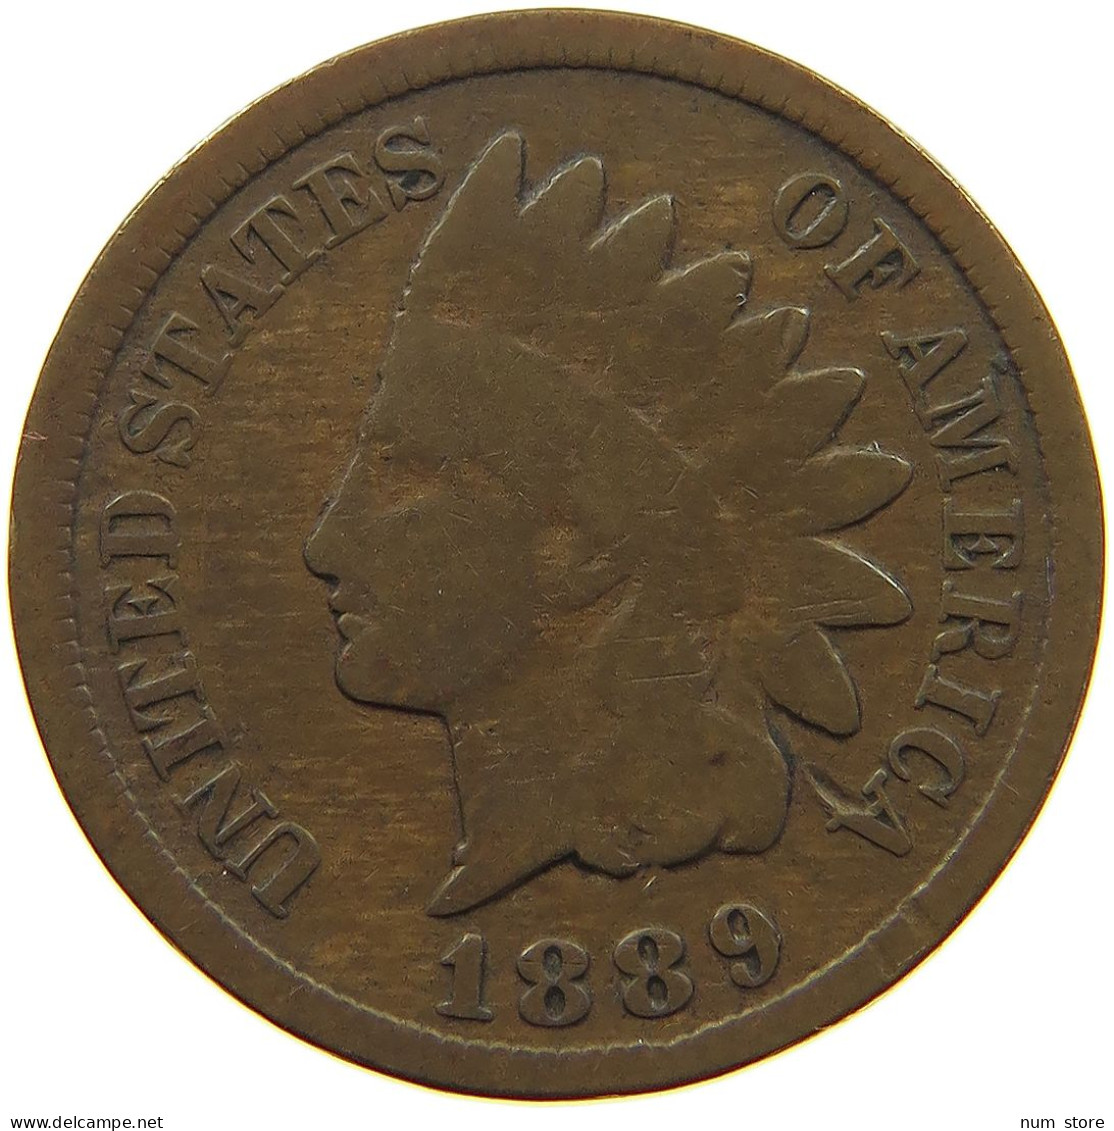 UNITED STATES OF AMERICA CENT 1889 INDIAN HEAD #s063 0433 - 1859-1909: Indian Head